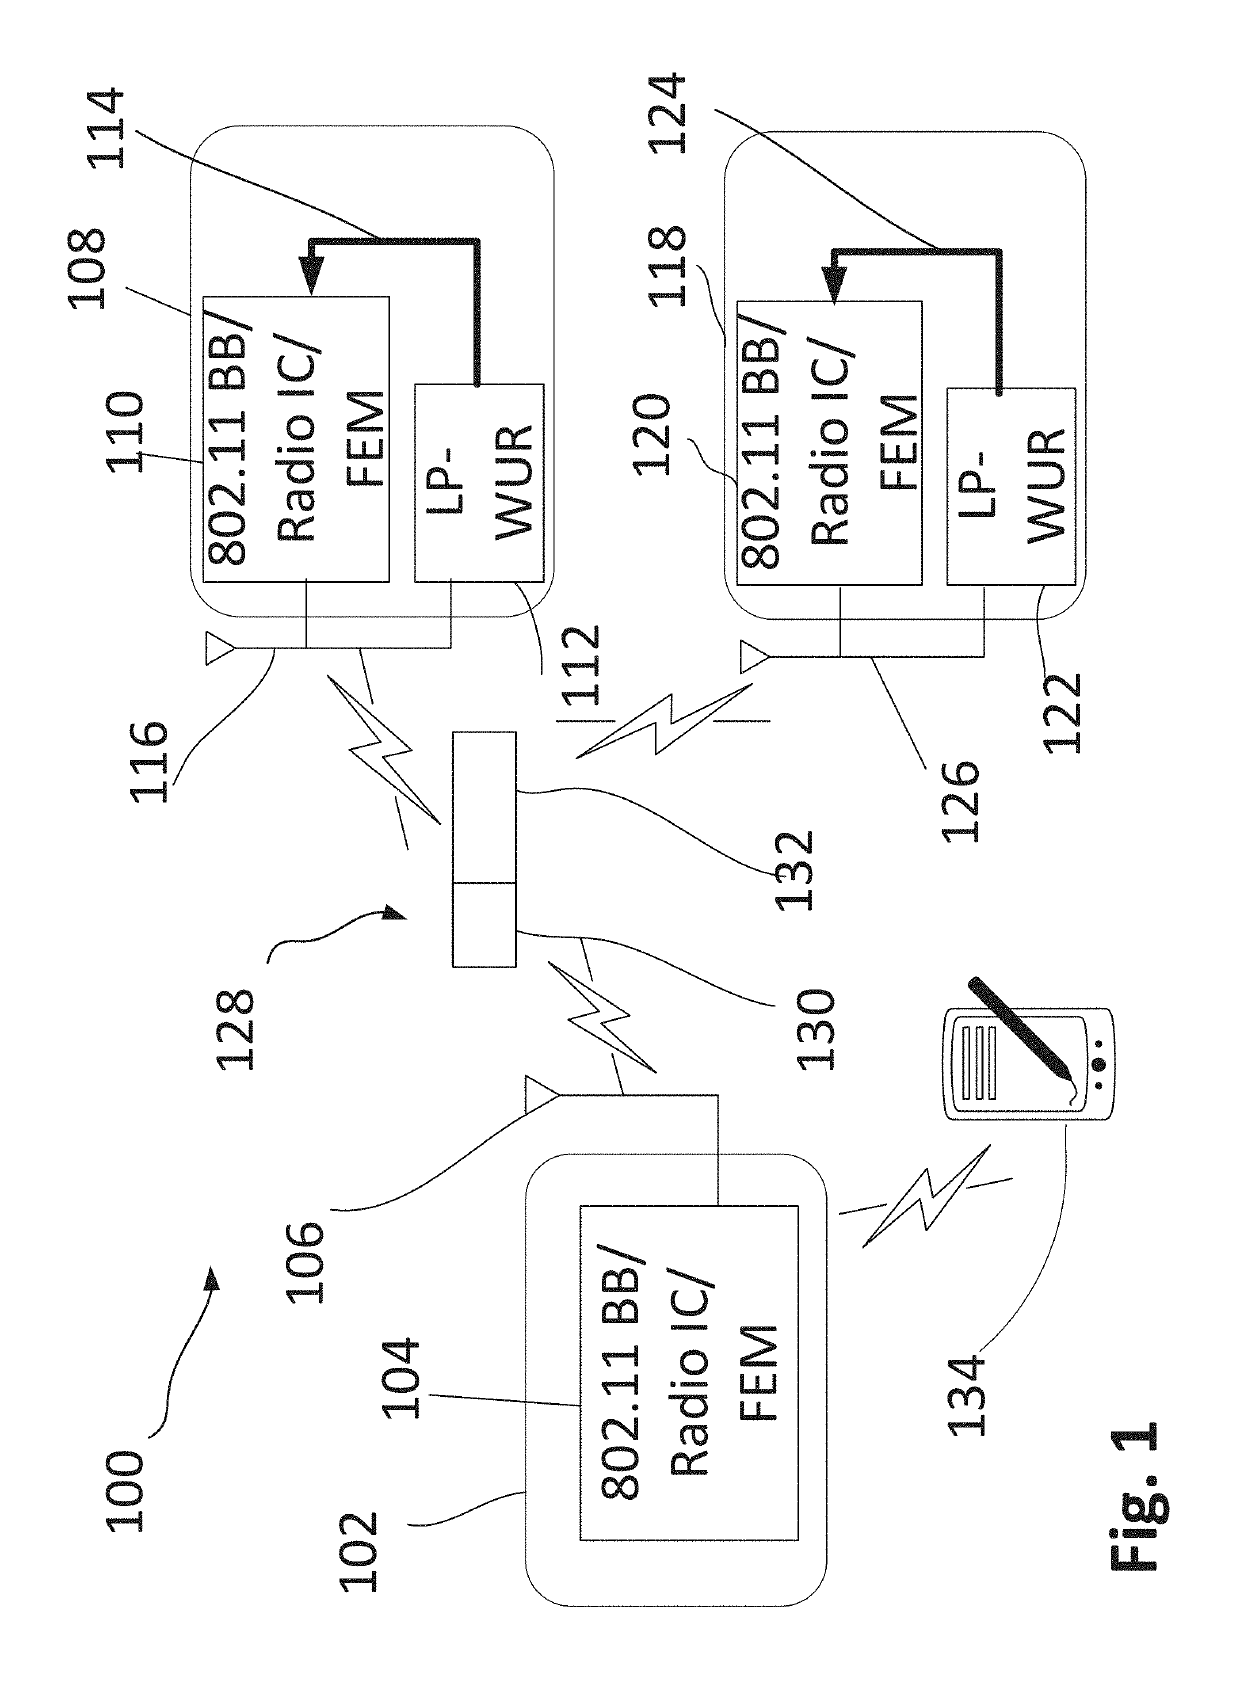 Wireless communication system and method to improve coexistence for wake-up packets